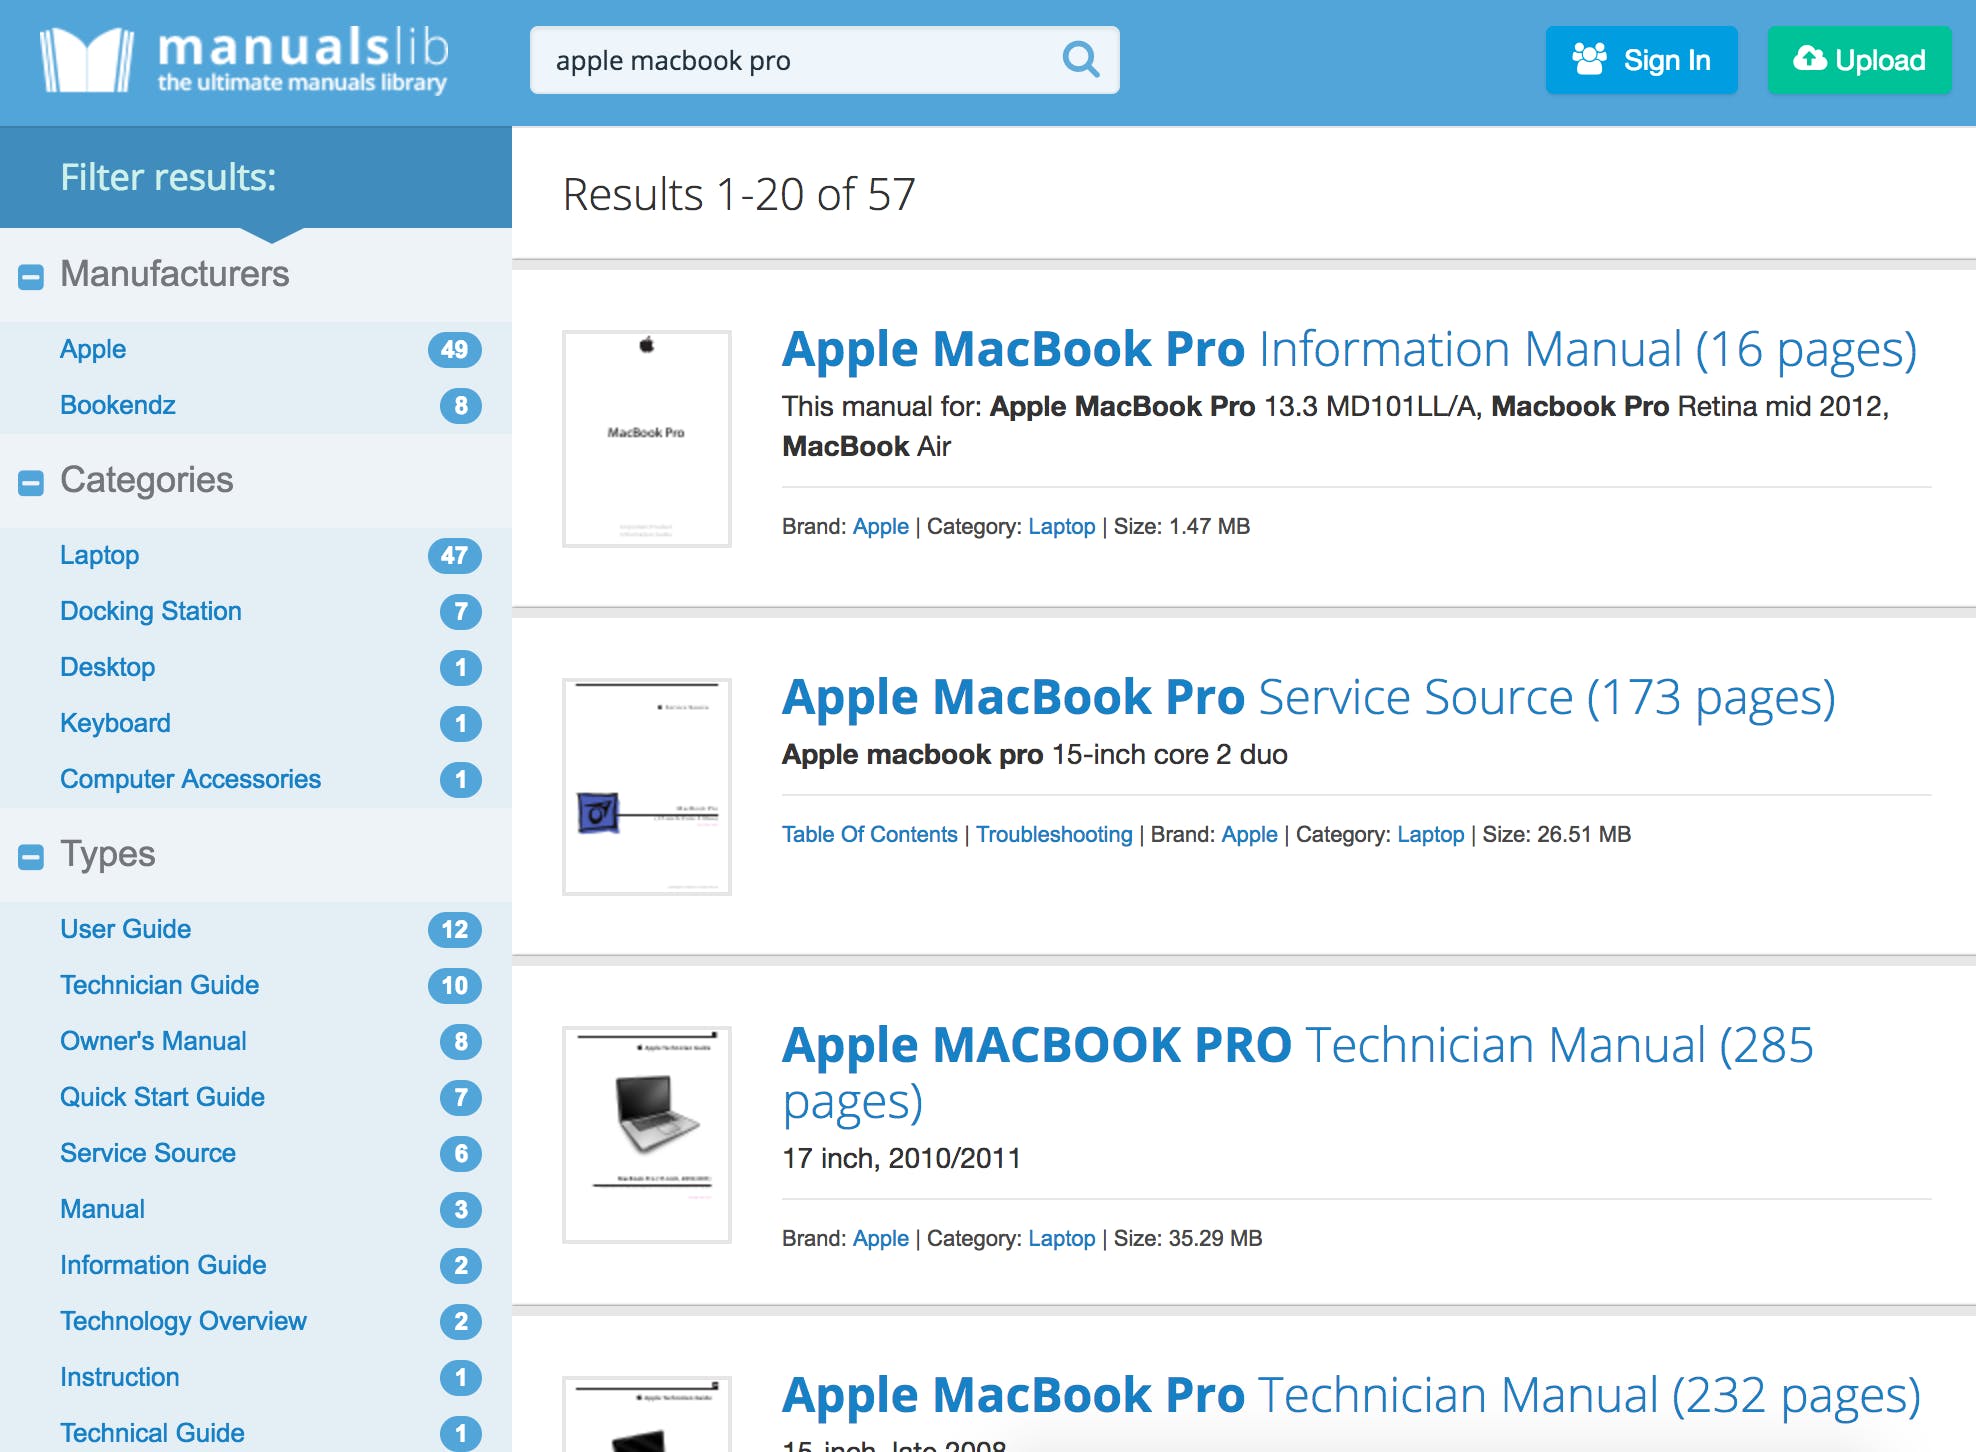 manualslib-a-database-of-over-2m-user-manuals-product-hunt